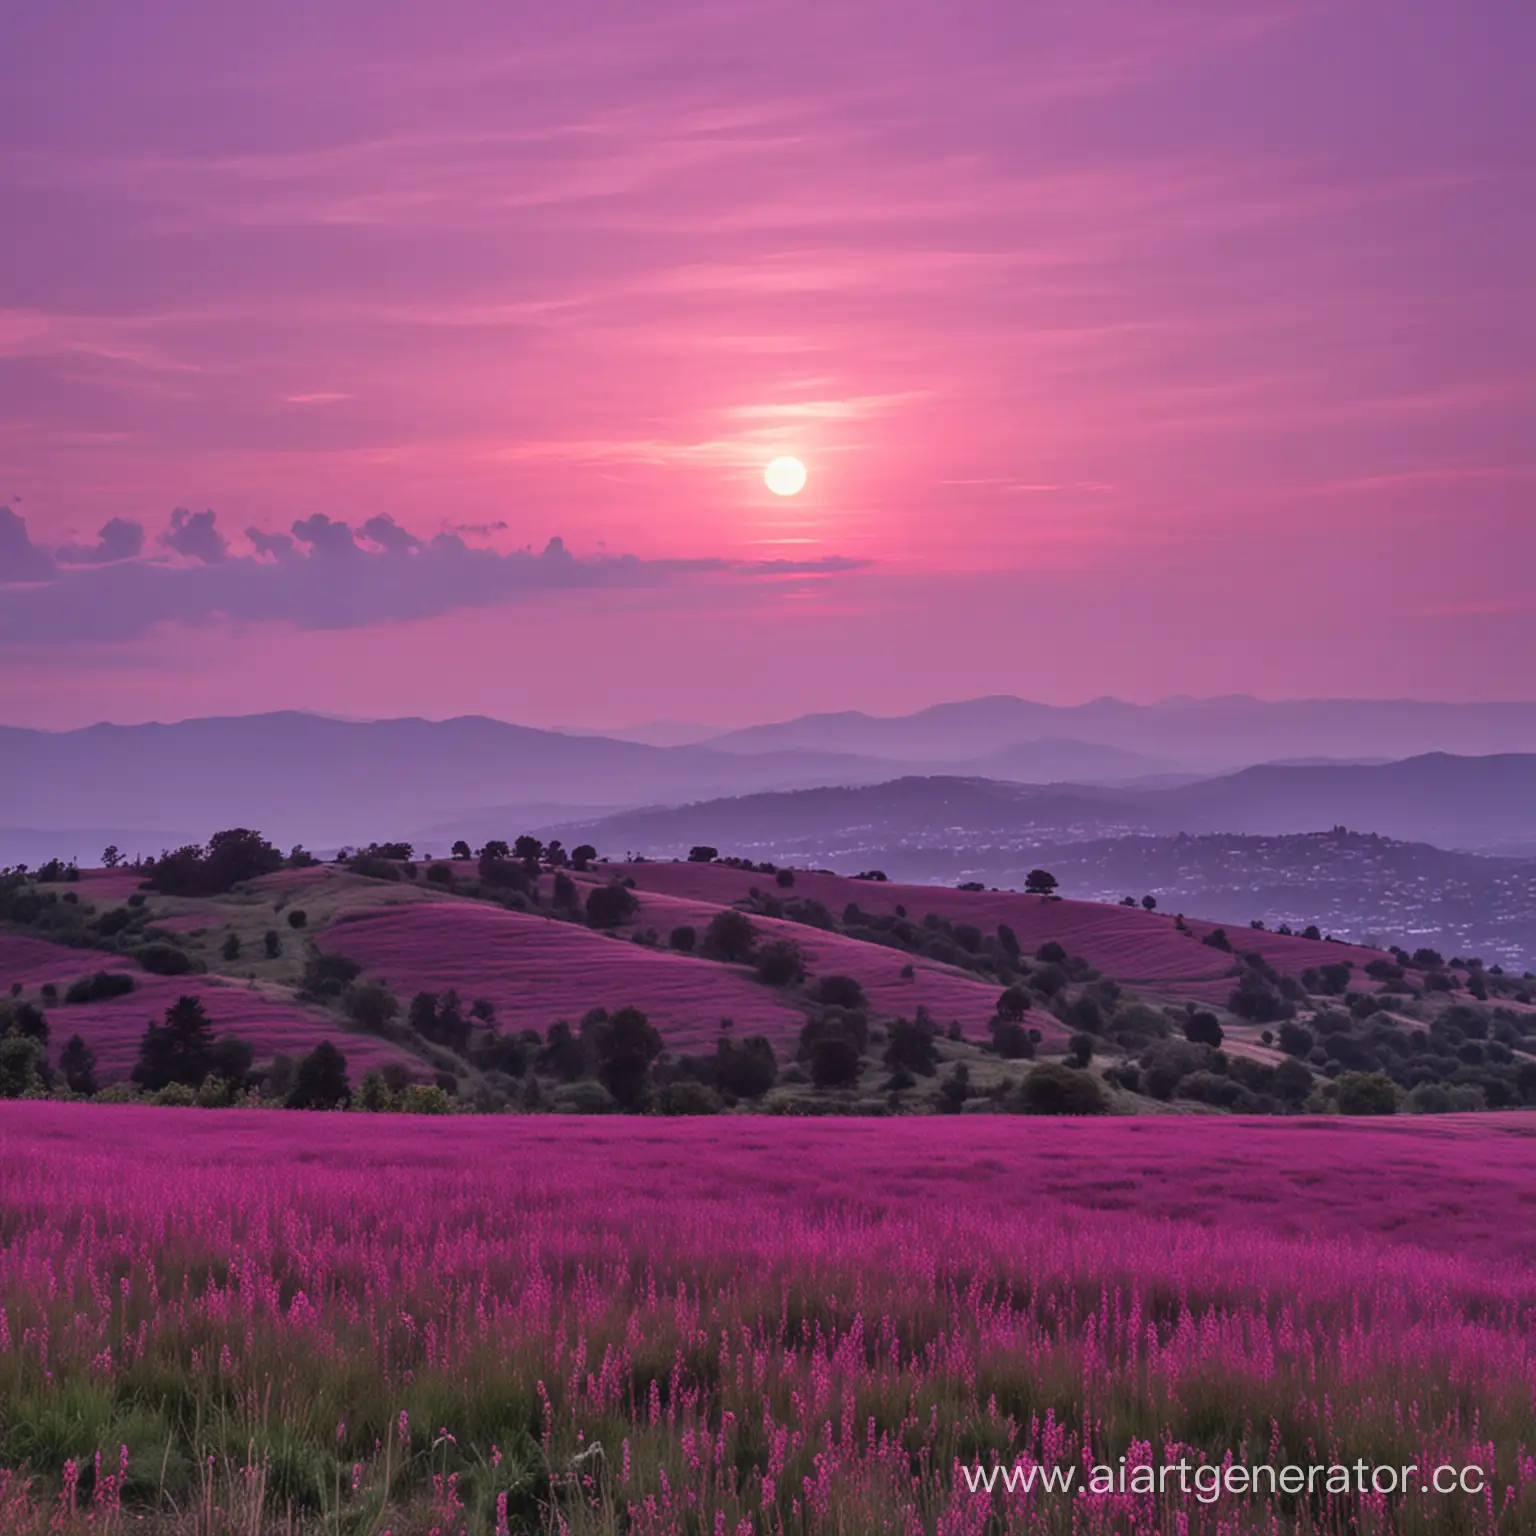 Vibrant-PurplePink-Sunset-Viewed-from-Hilltop